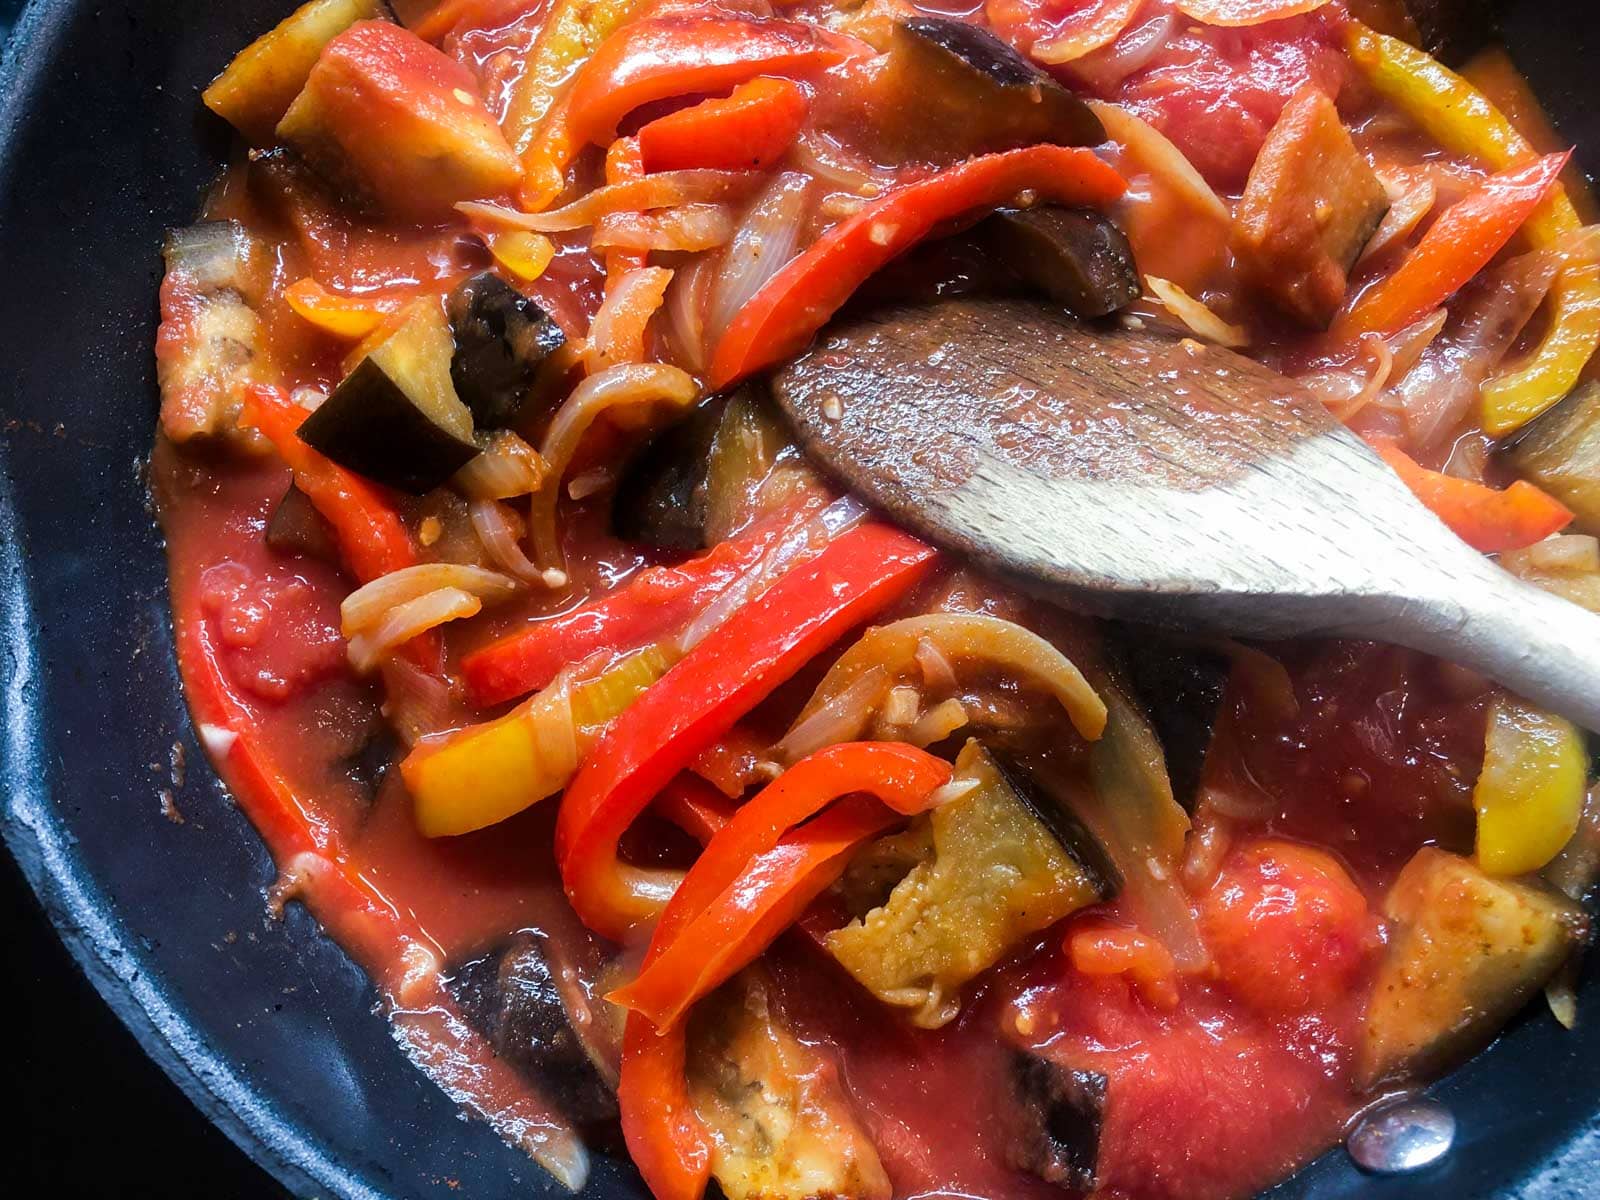 Peppers, onions and aubergines cooking in a fry pan with spices and tomatoes.